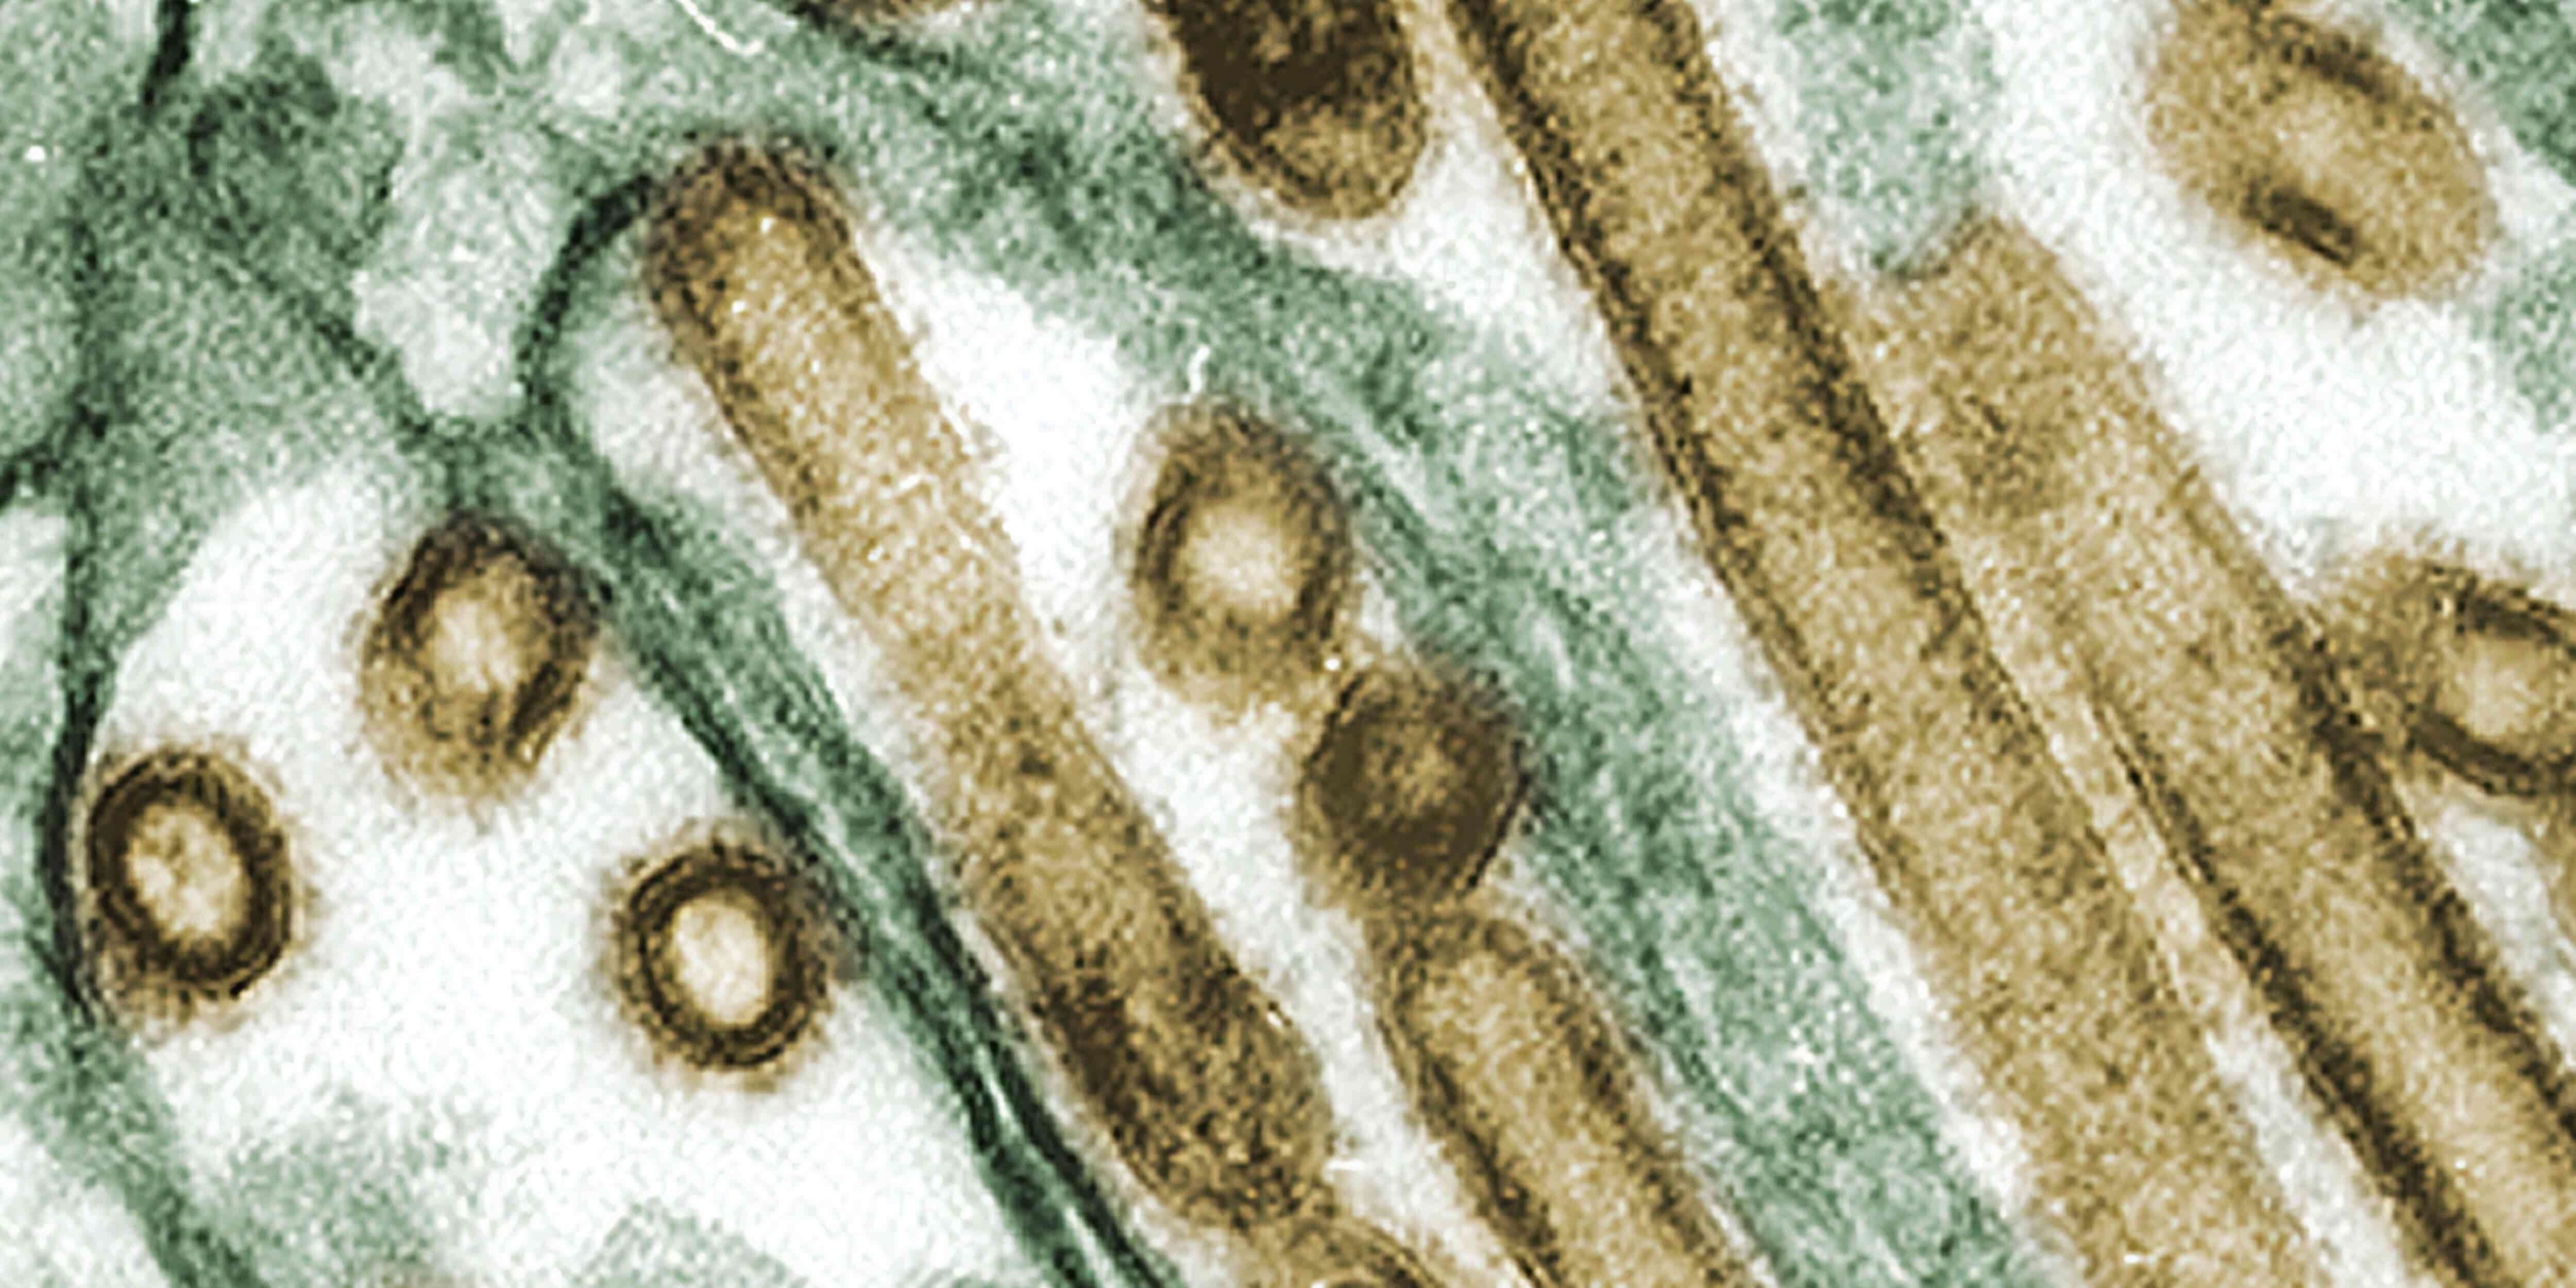 Influenza added as a topic